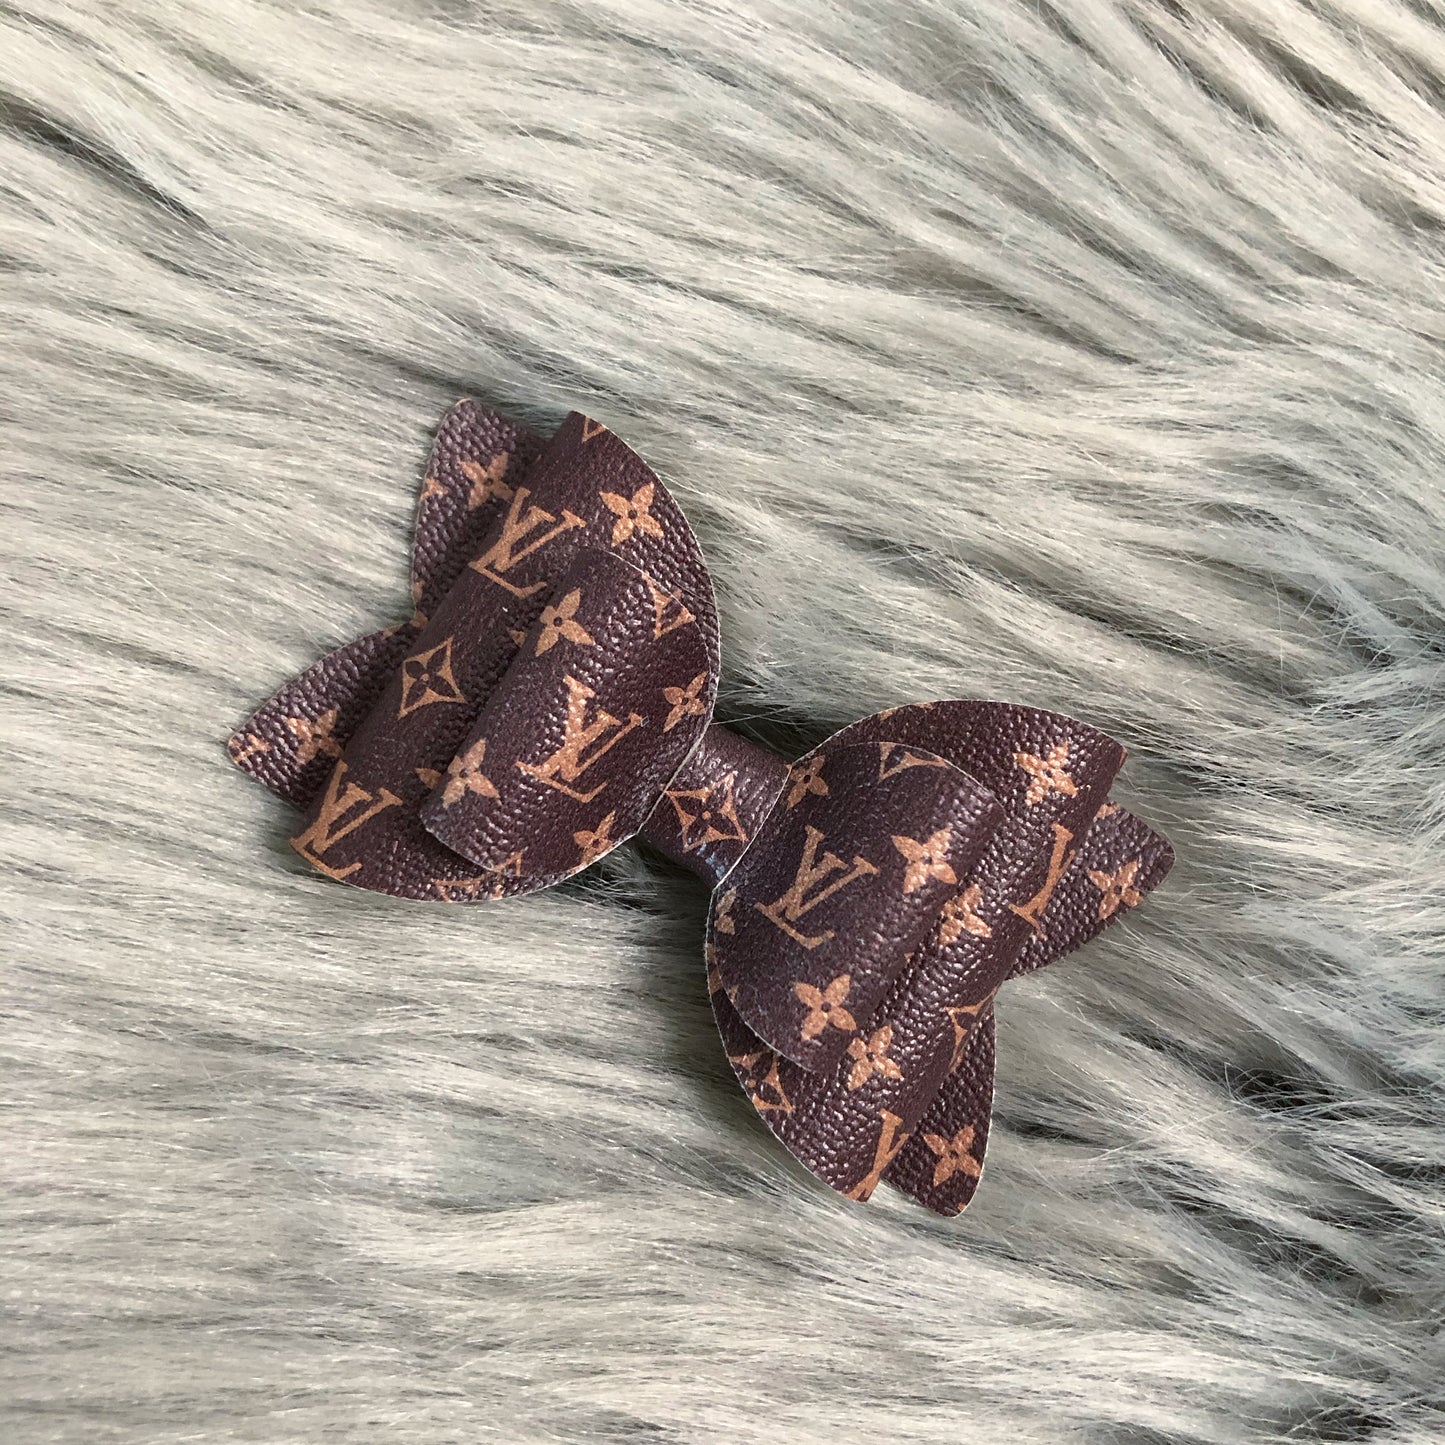 LV & Chanel Straw Toppers